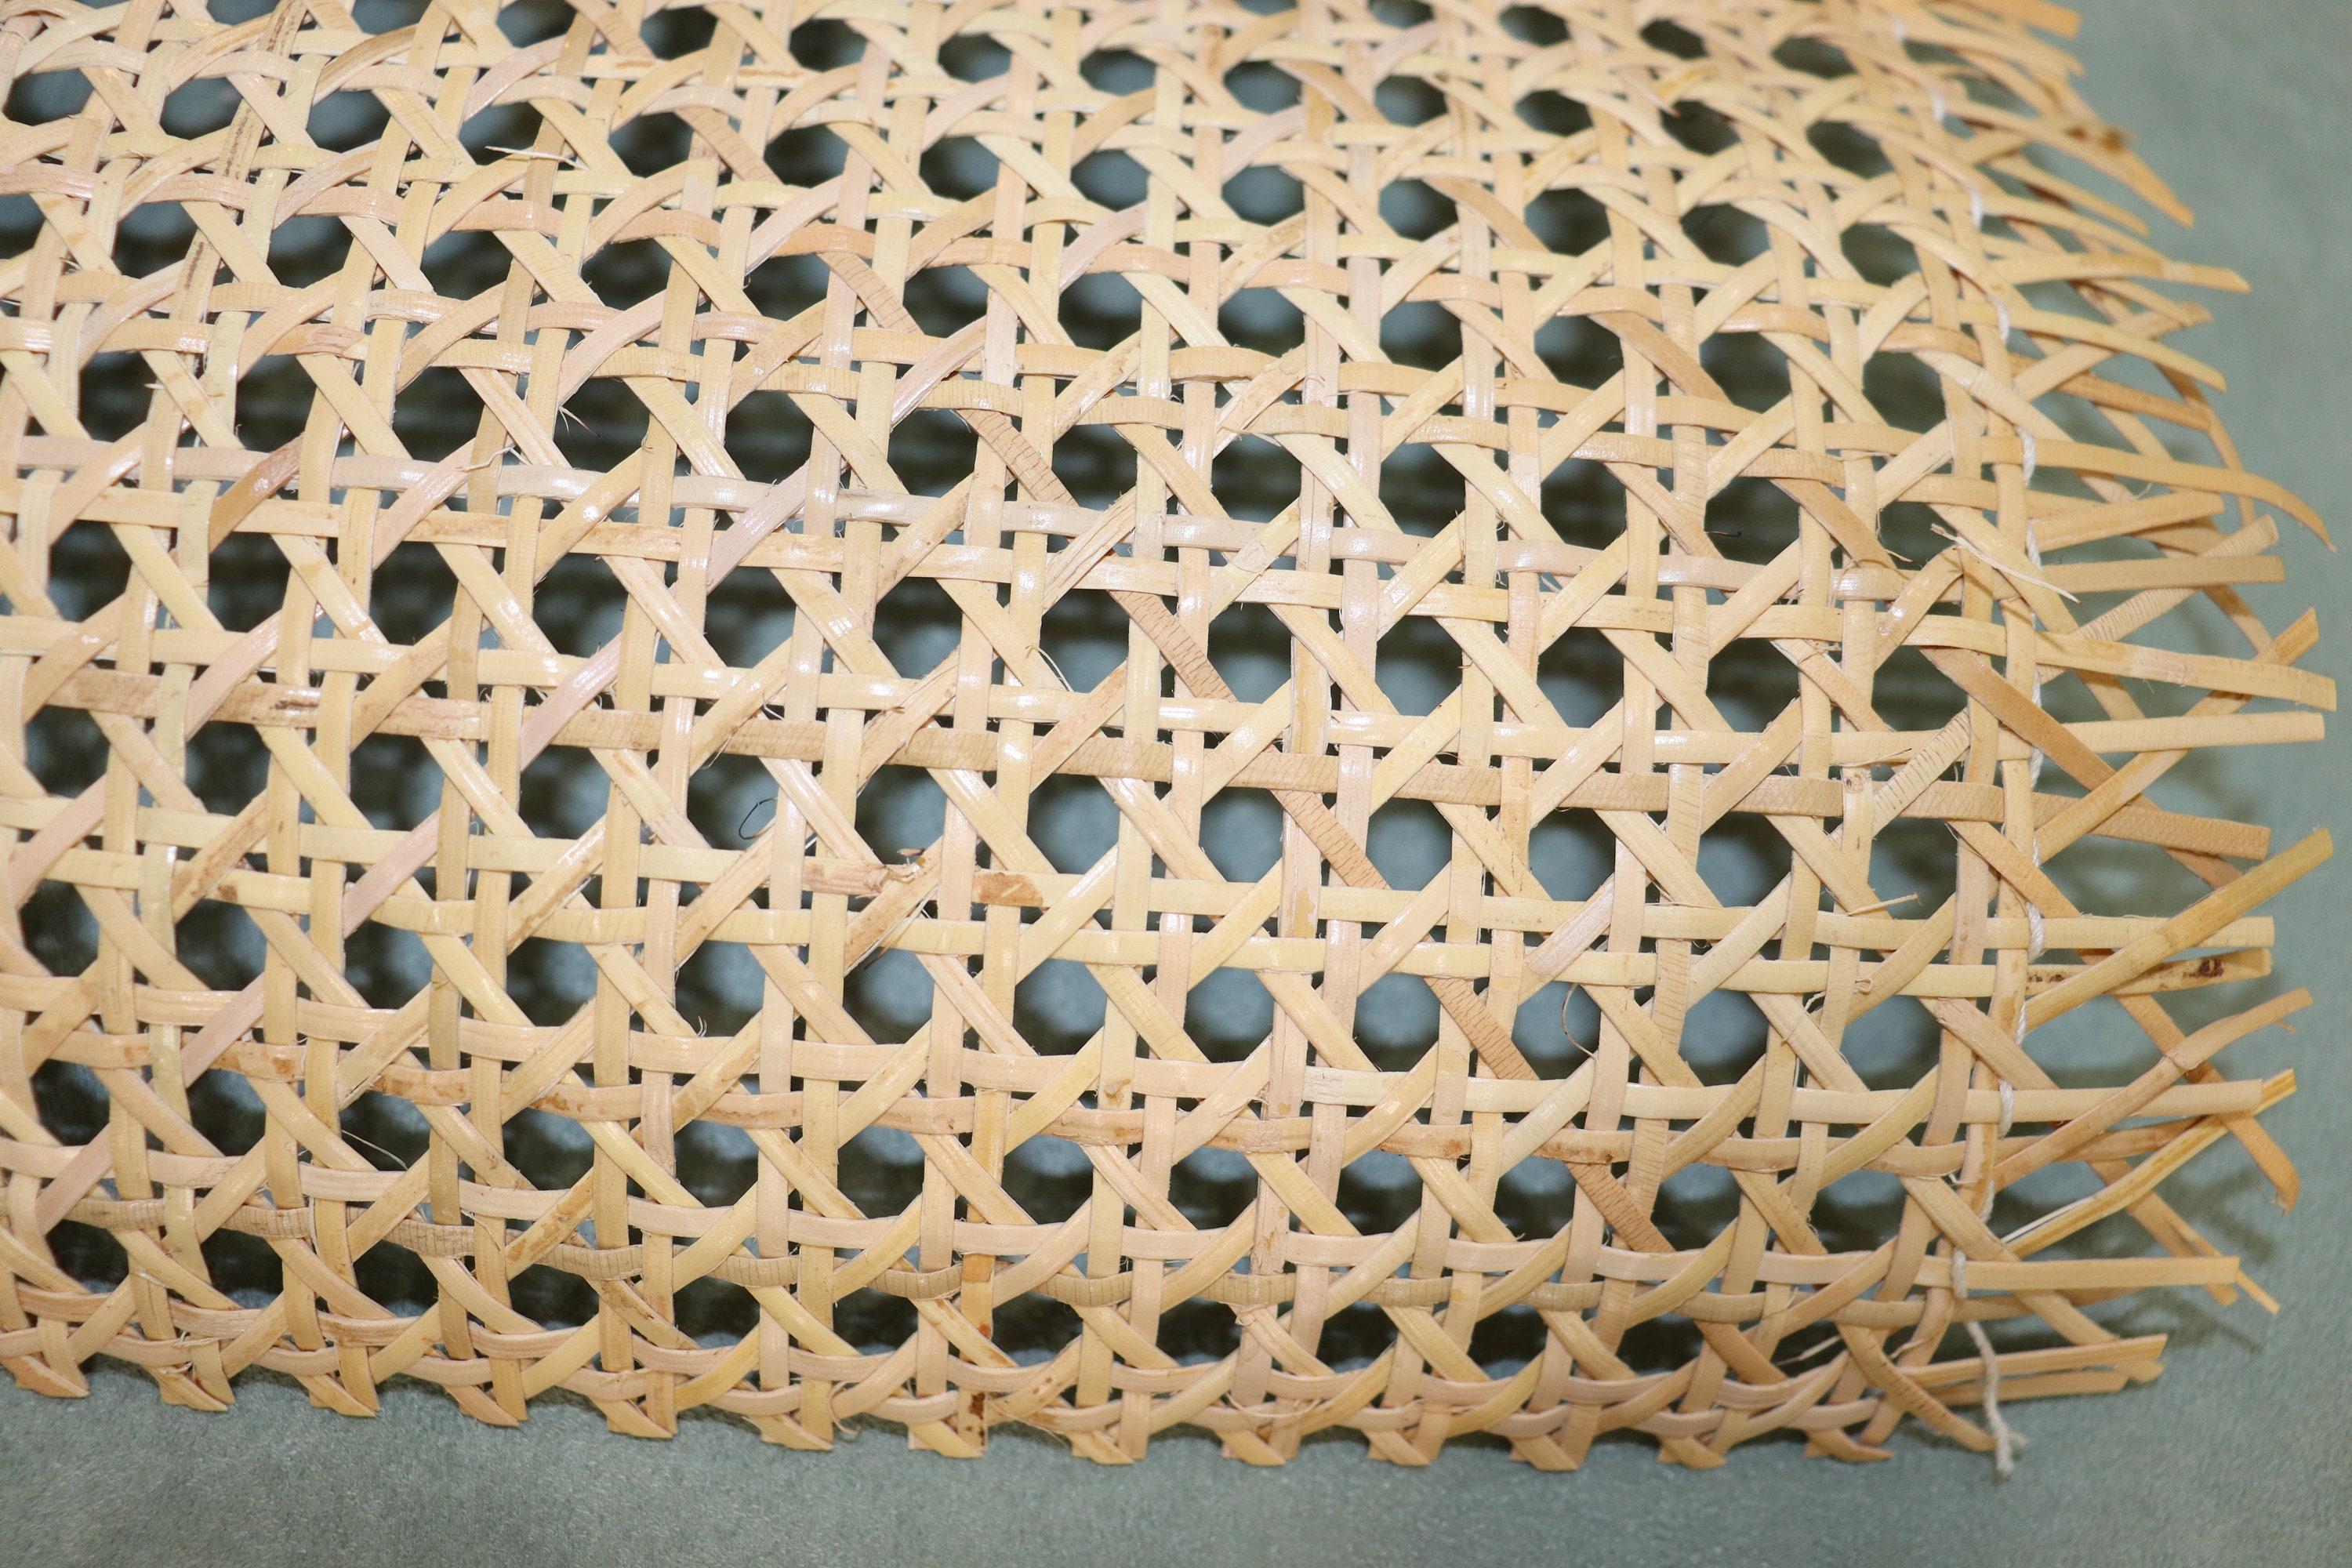 24 Wide Semi-Bleached Rattan Webbing Roll for Caning Projects, Natural Pre  - Woven Open Mesh for Caning Chair, Craft Cabinet and Furniture - Rattan  Hexagon Cane Webbing - Discount Trends 